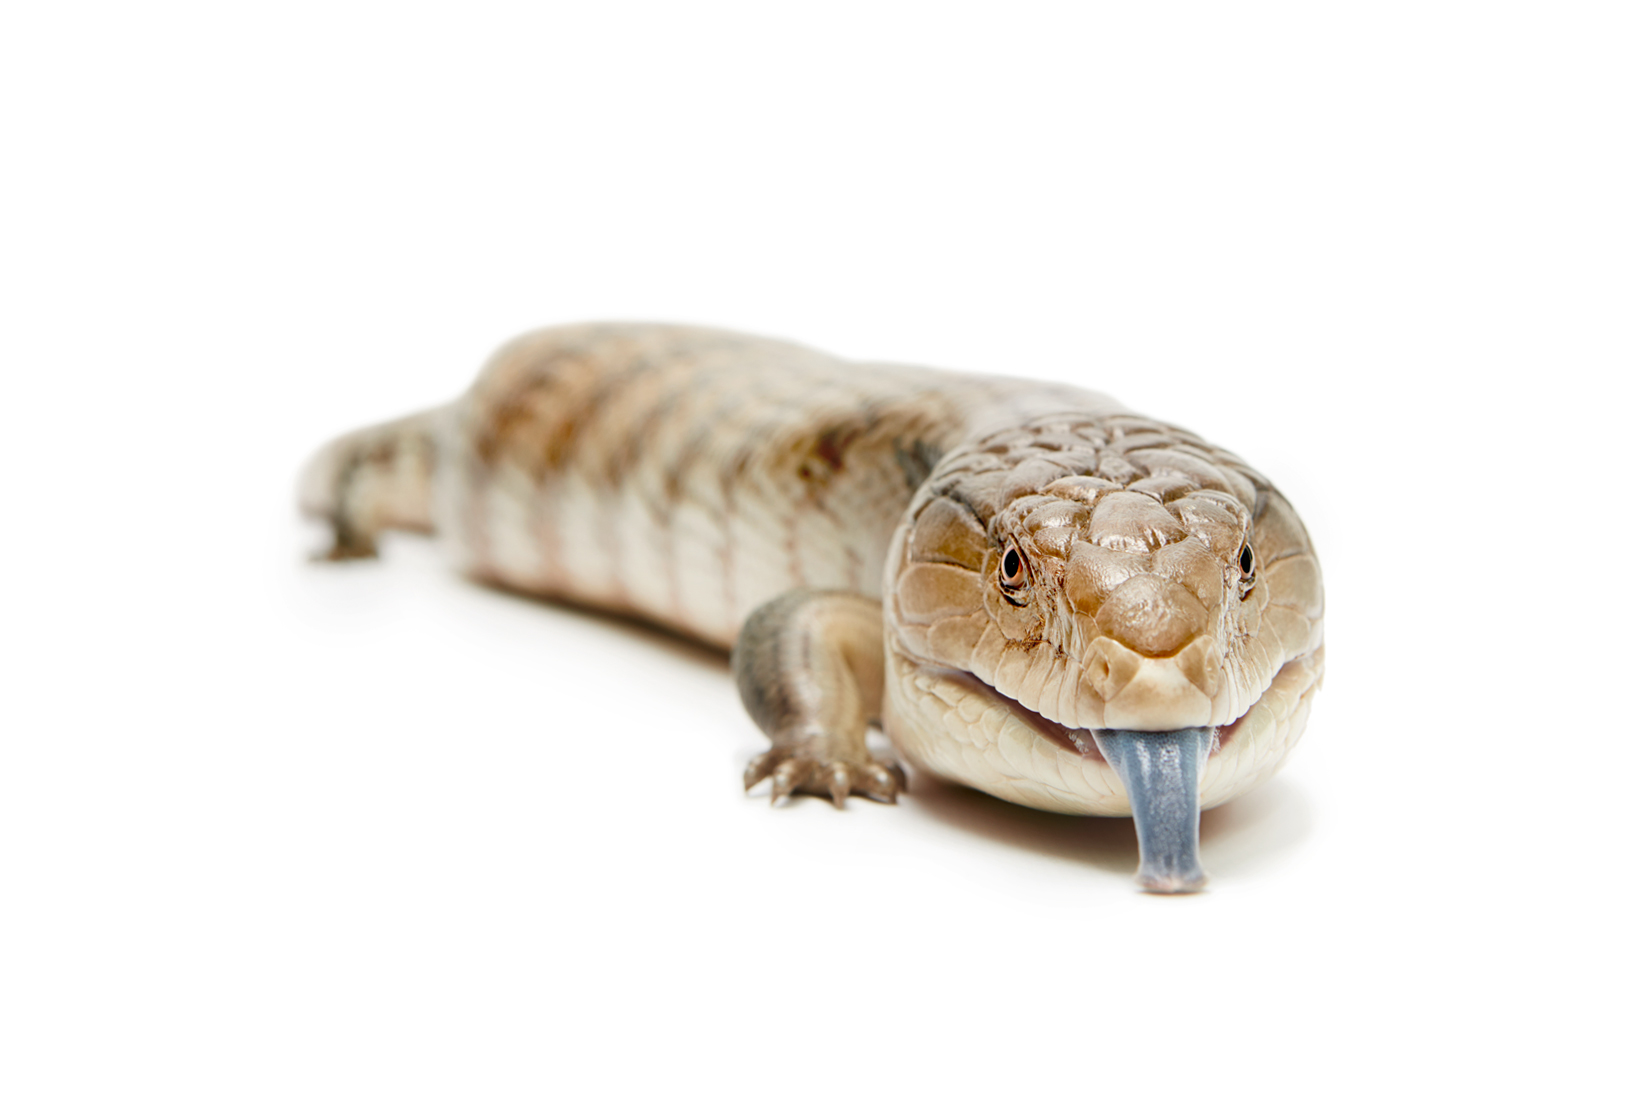 Blue-tongued skinks lizard with tongue out